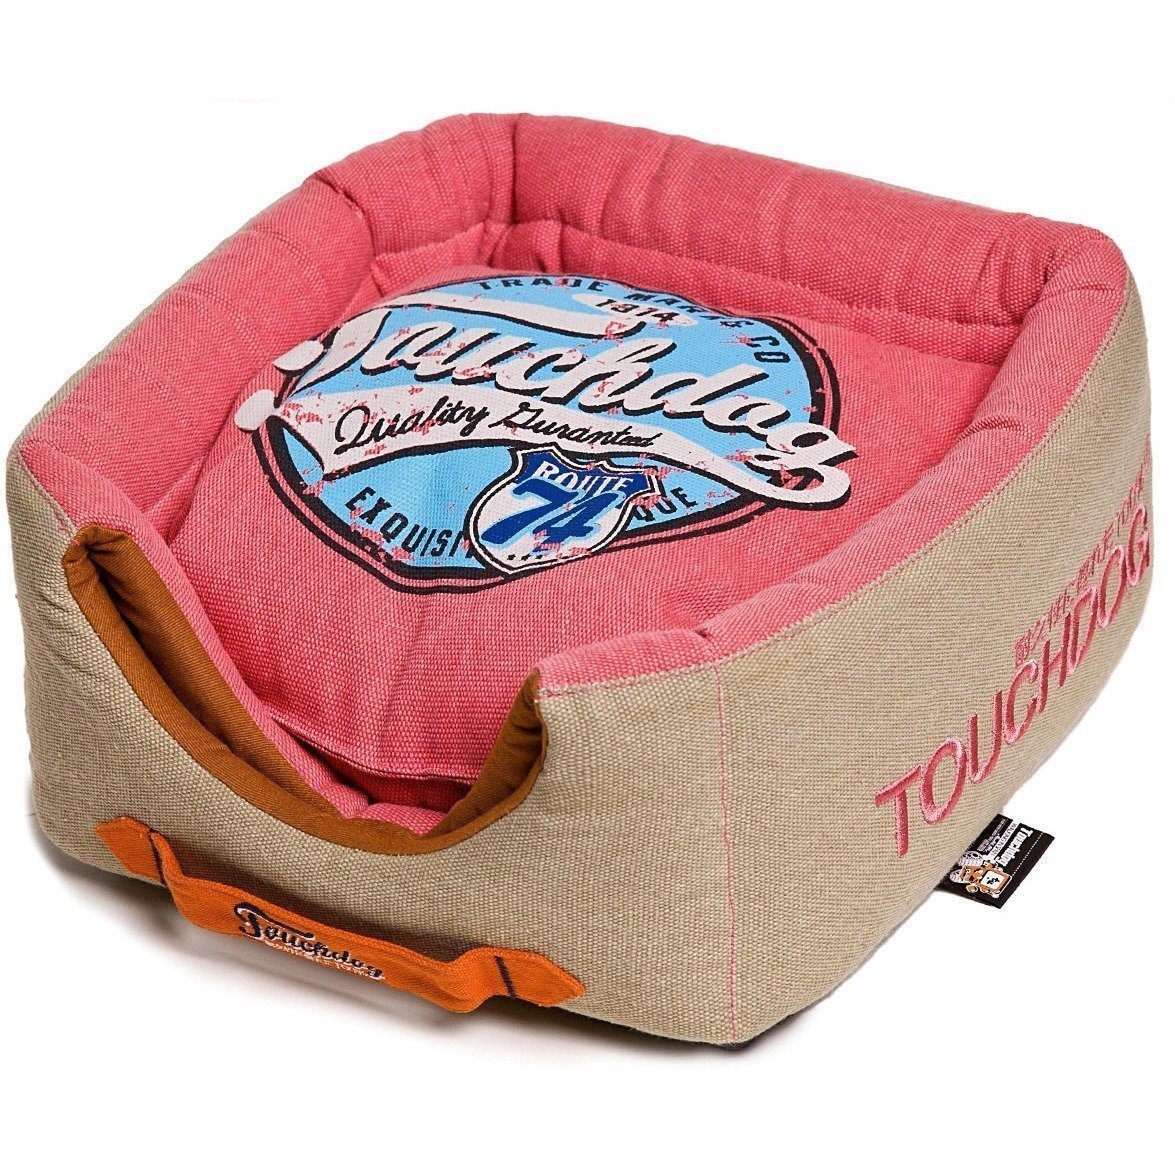 Touchdog ® 'Vintage Squared' 2-in-1 Convertible and Collapsible Dog and Cat Bed Bubblegum Pink, Beige 